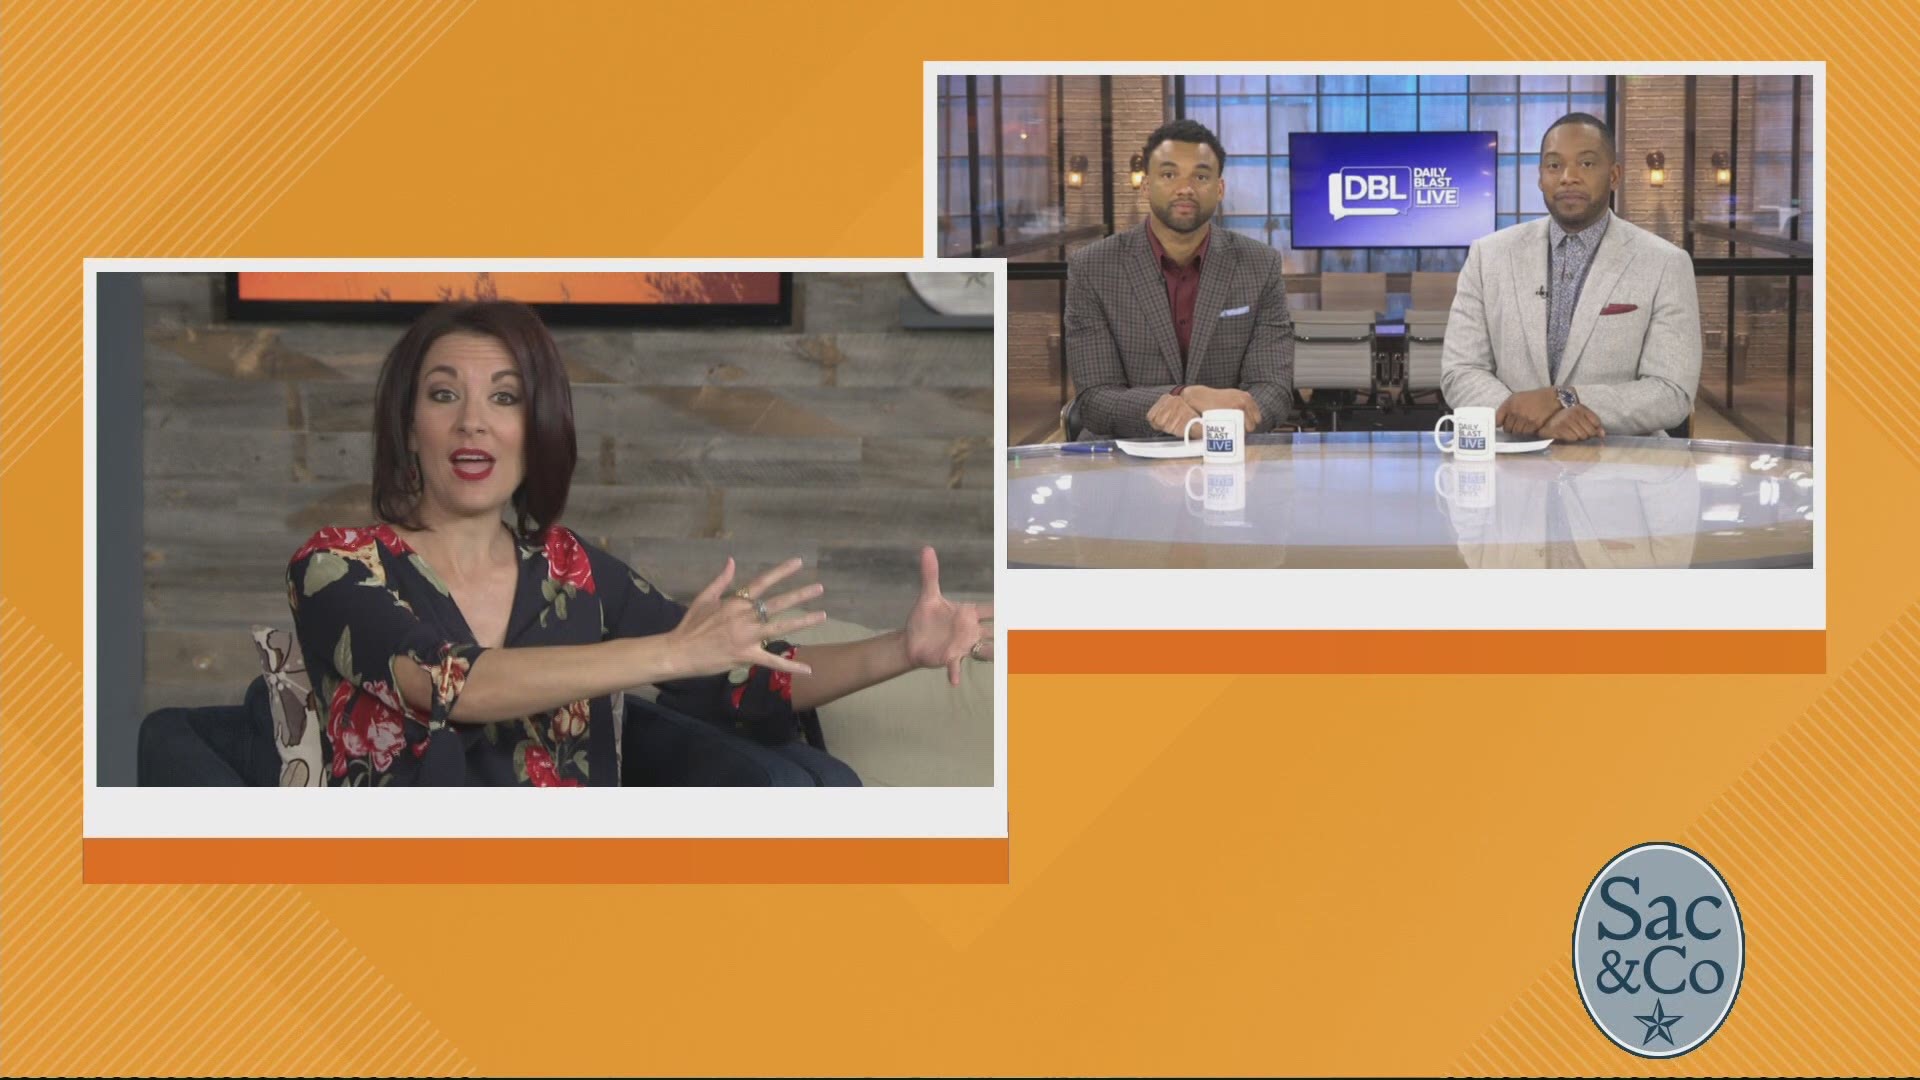 Mellisa Paul chats with Daily Blast Live, hosts about the latest trends and hot topics!